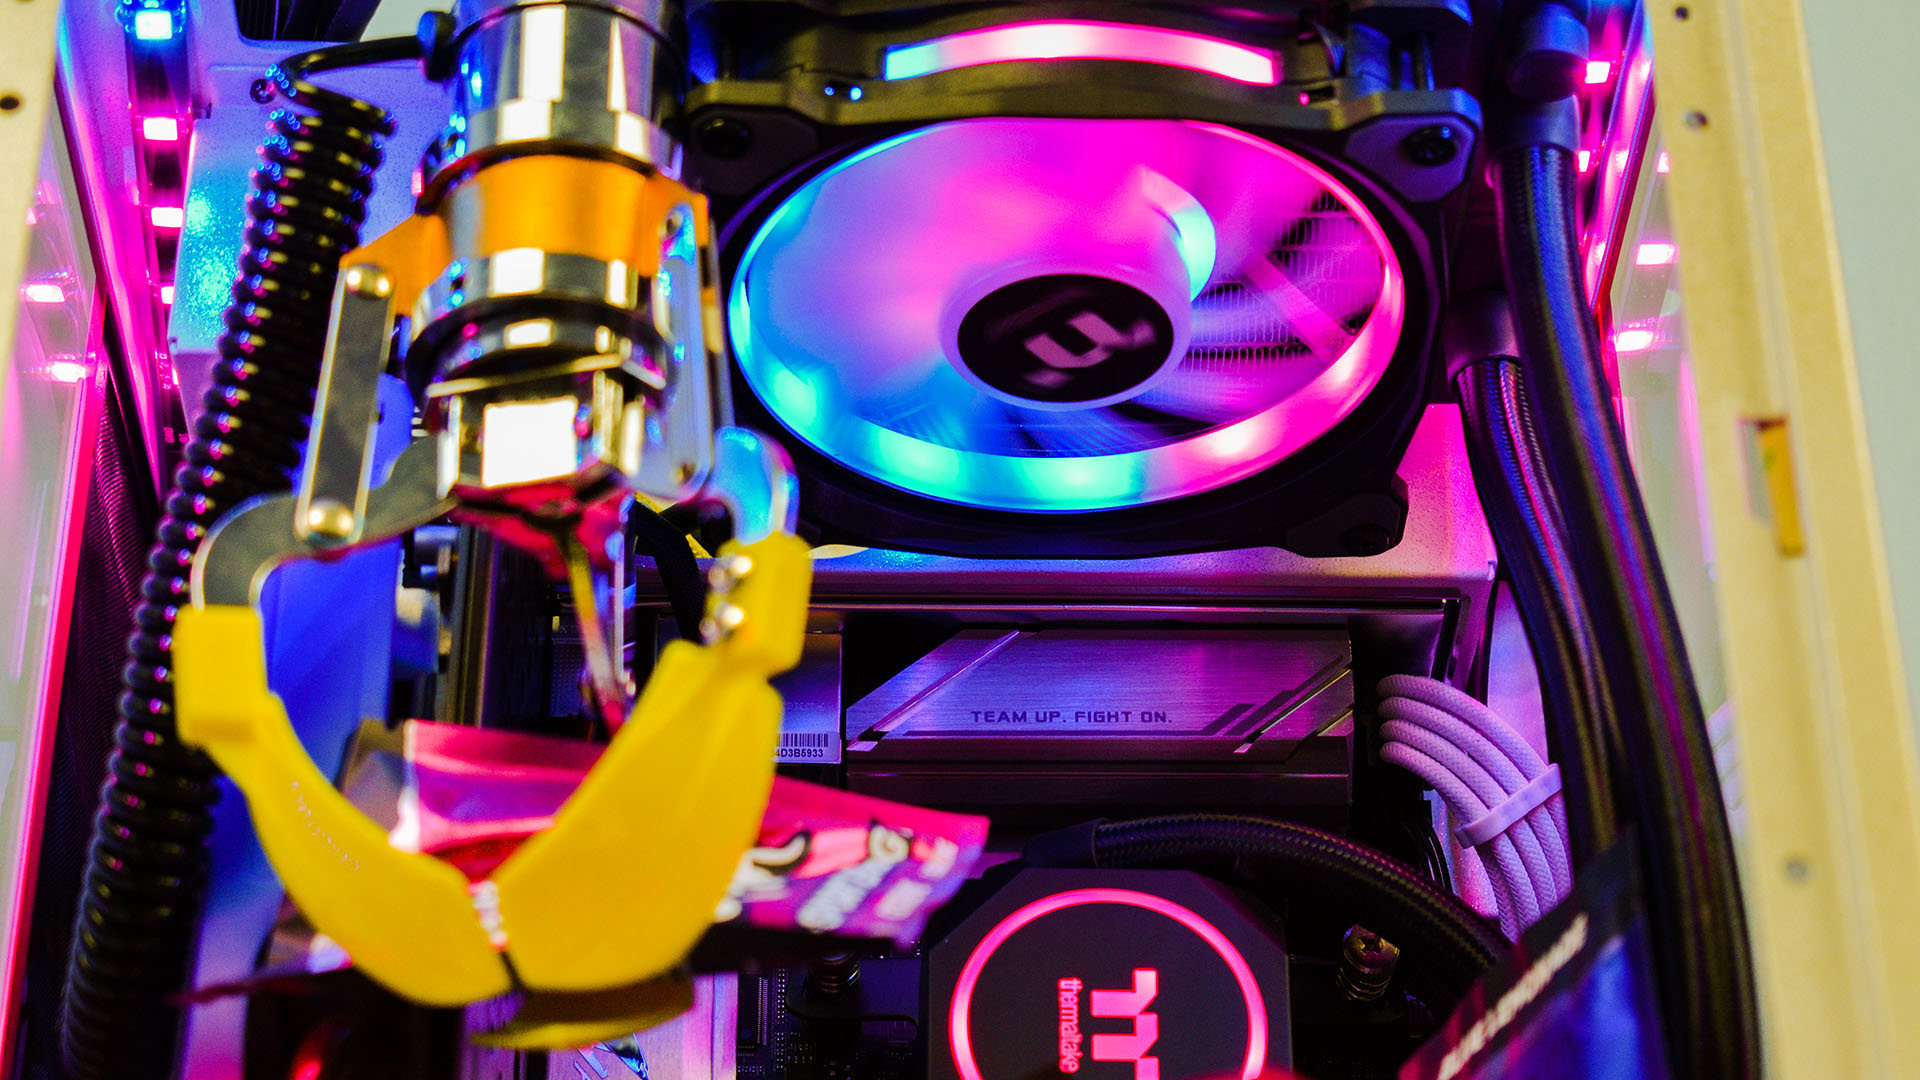 This neon-colored gaming PC looks like a claw arcade machine